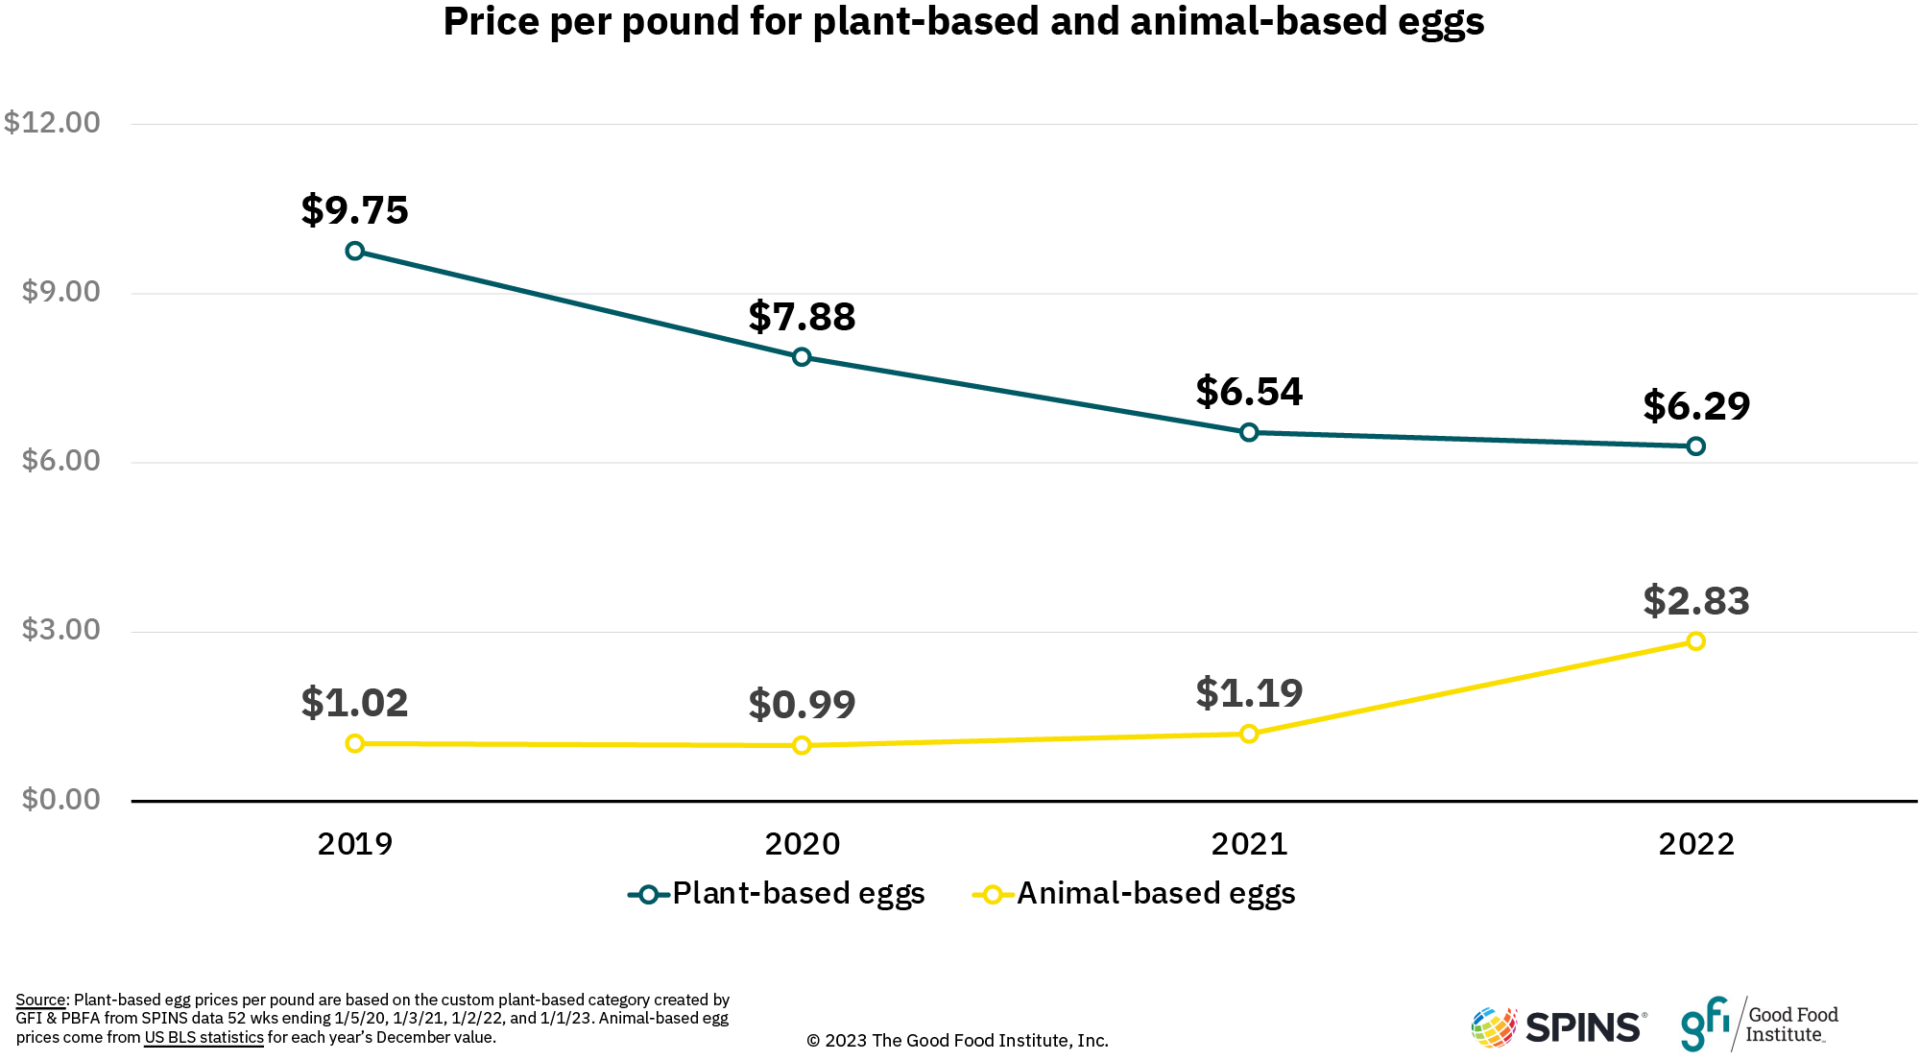 Summary of price per pound for plant-based and animal-based eggs